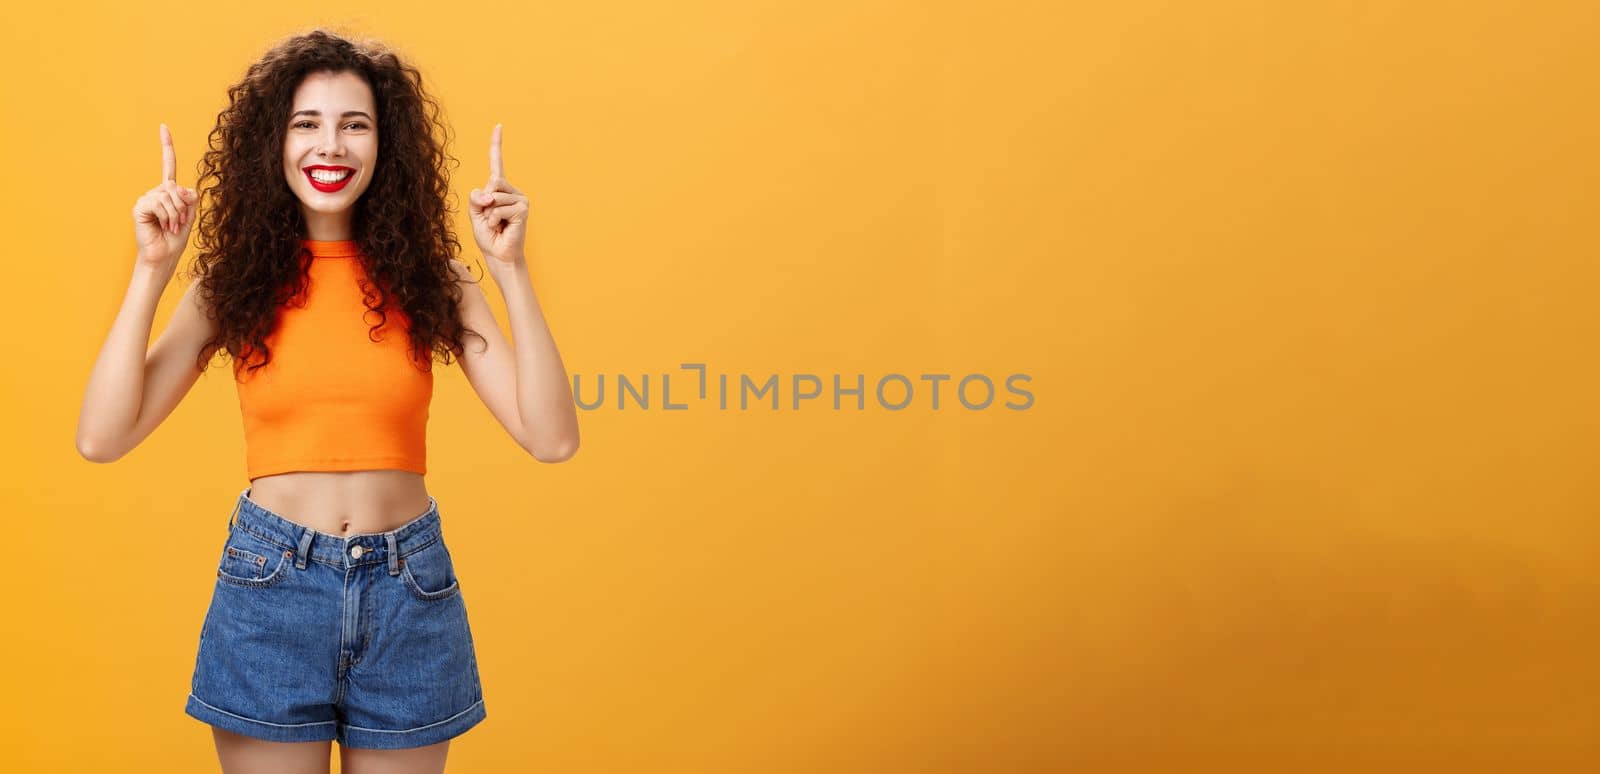 Indoor shot of friendly and cute happy relaxed female with red lipstick and curly hairstyle wearing cool cropped top and denim shorts smiling broadly pointing up posing over orange background. Copy space